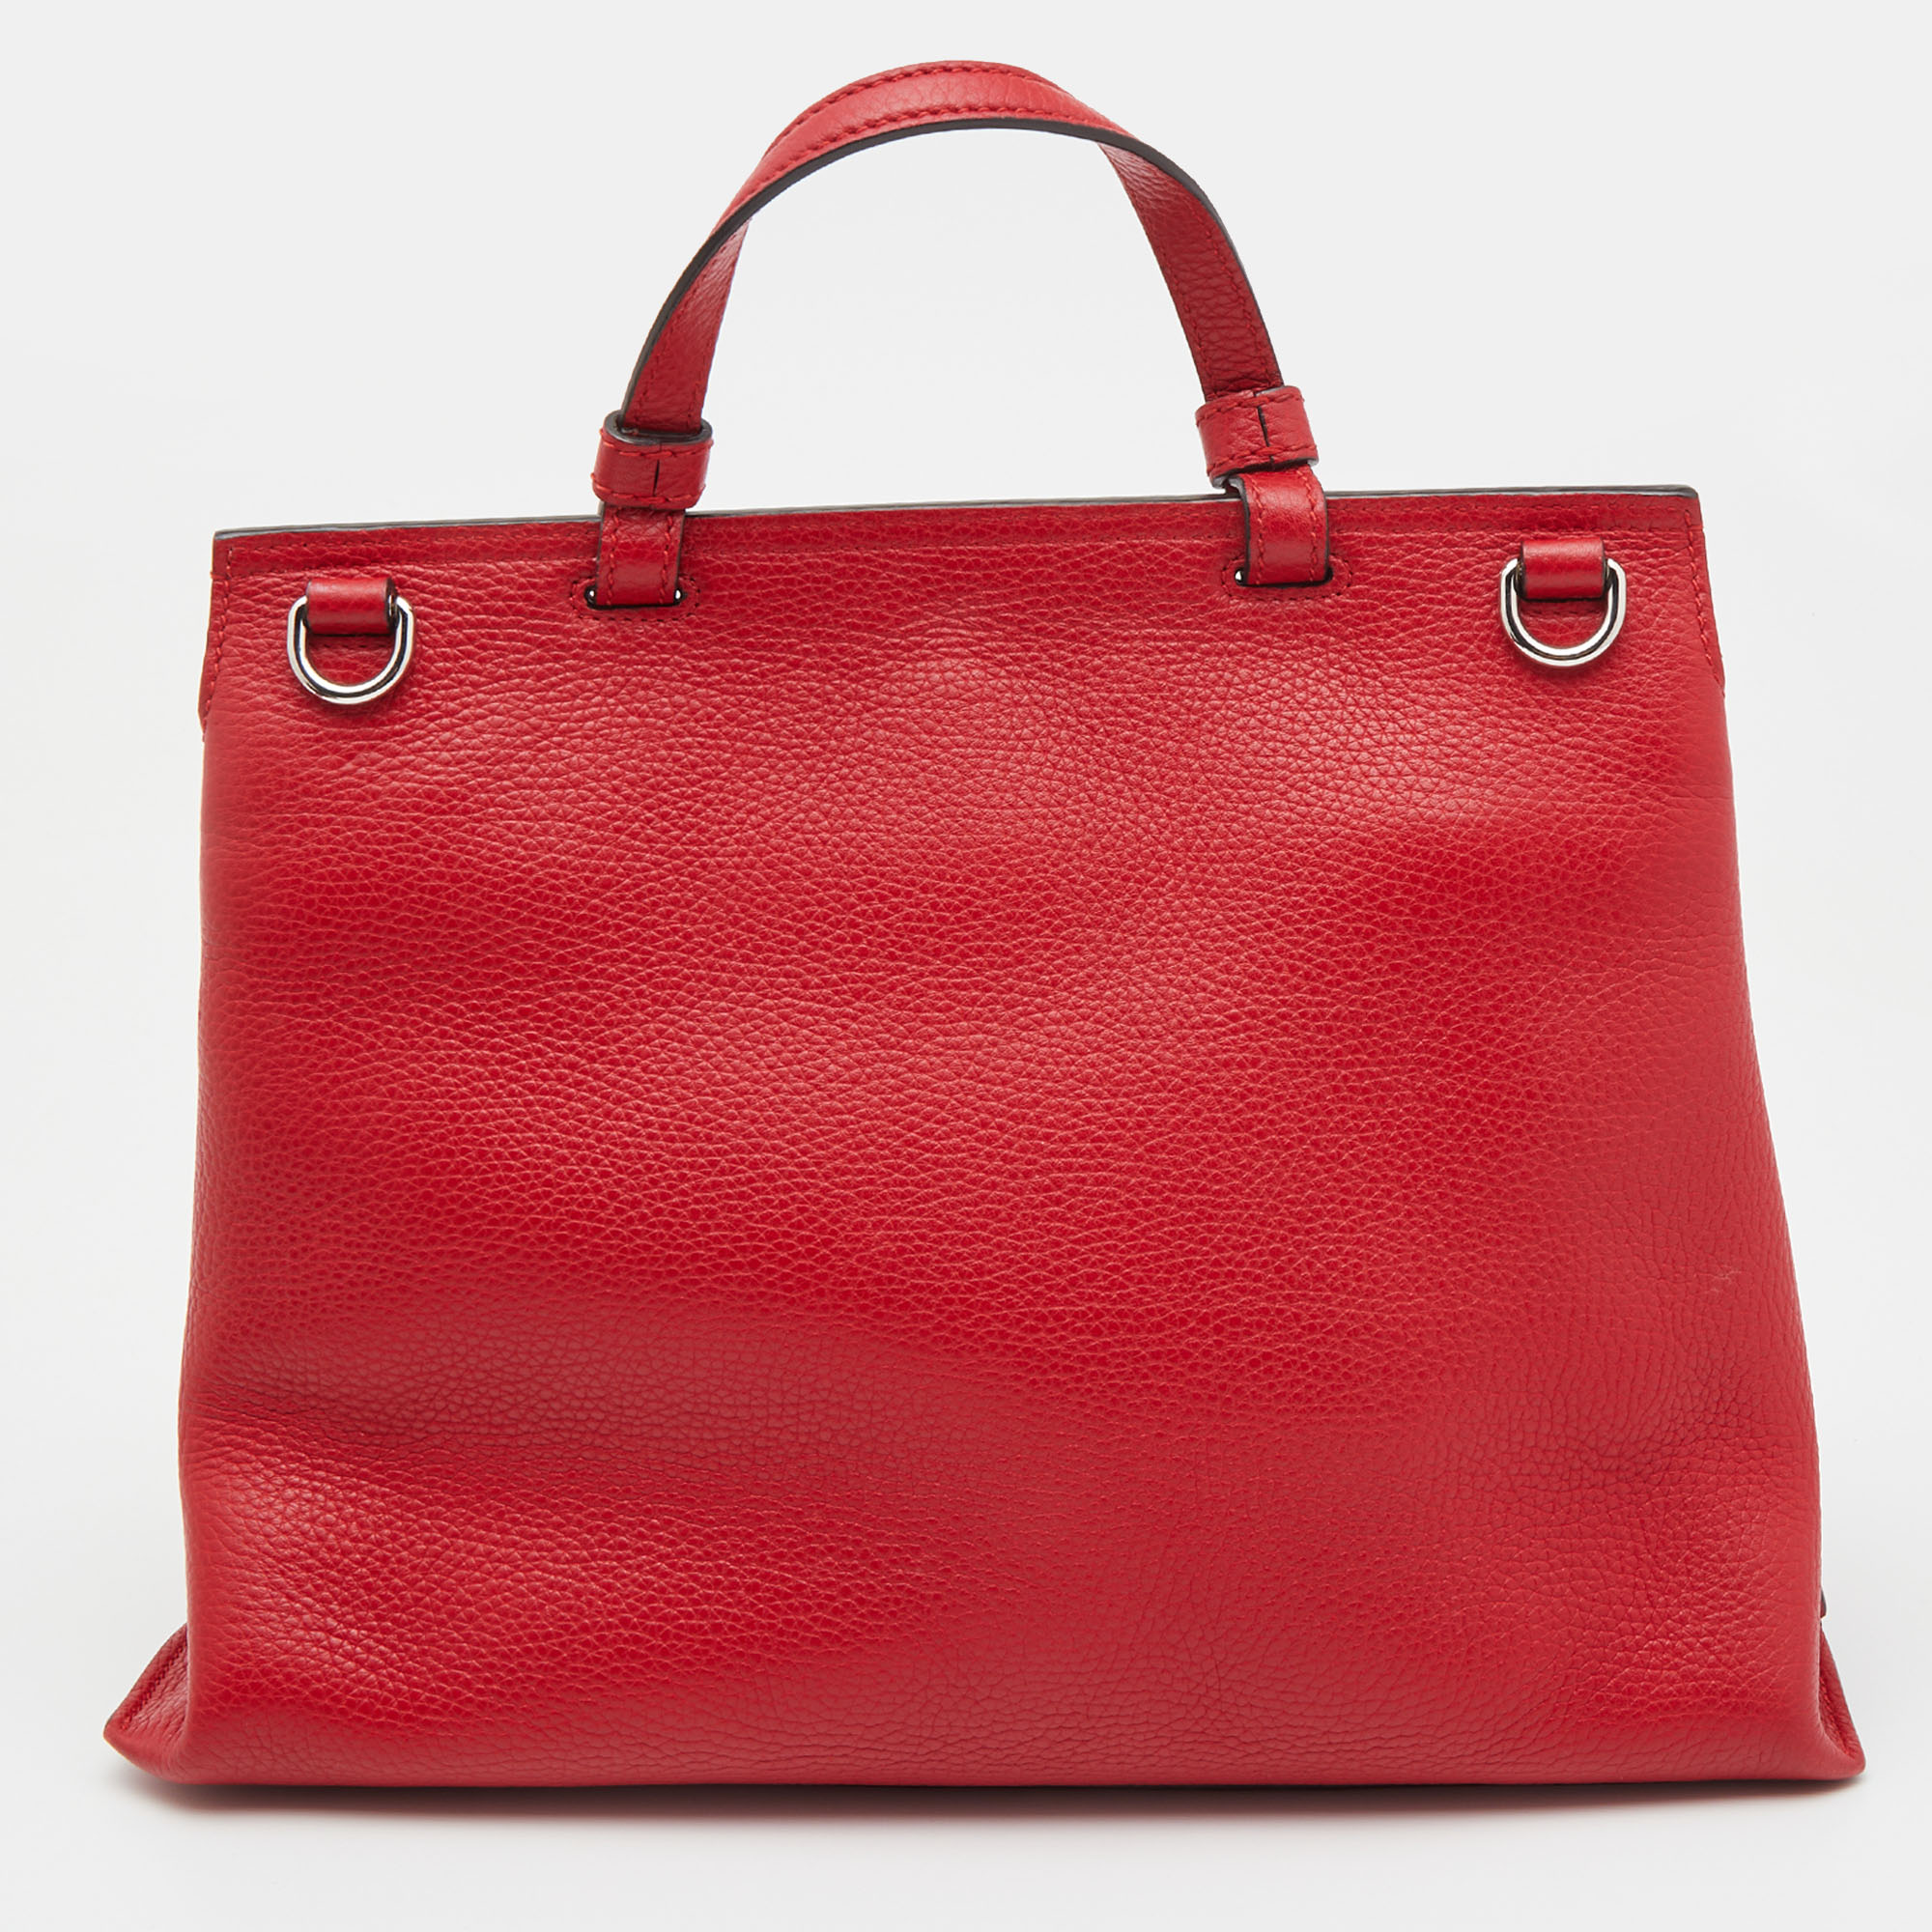 Gucci Red Leather Medium Bamboo Daily Top Handle Bag